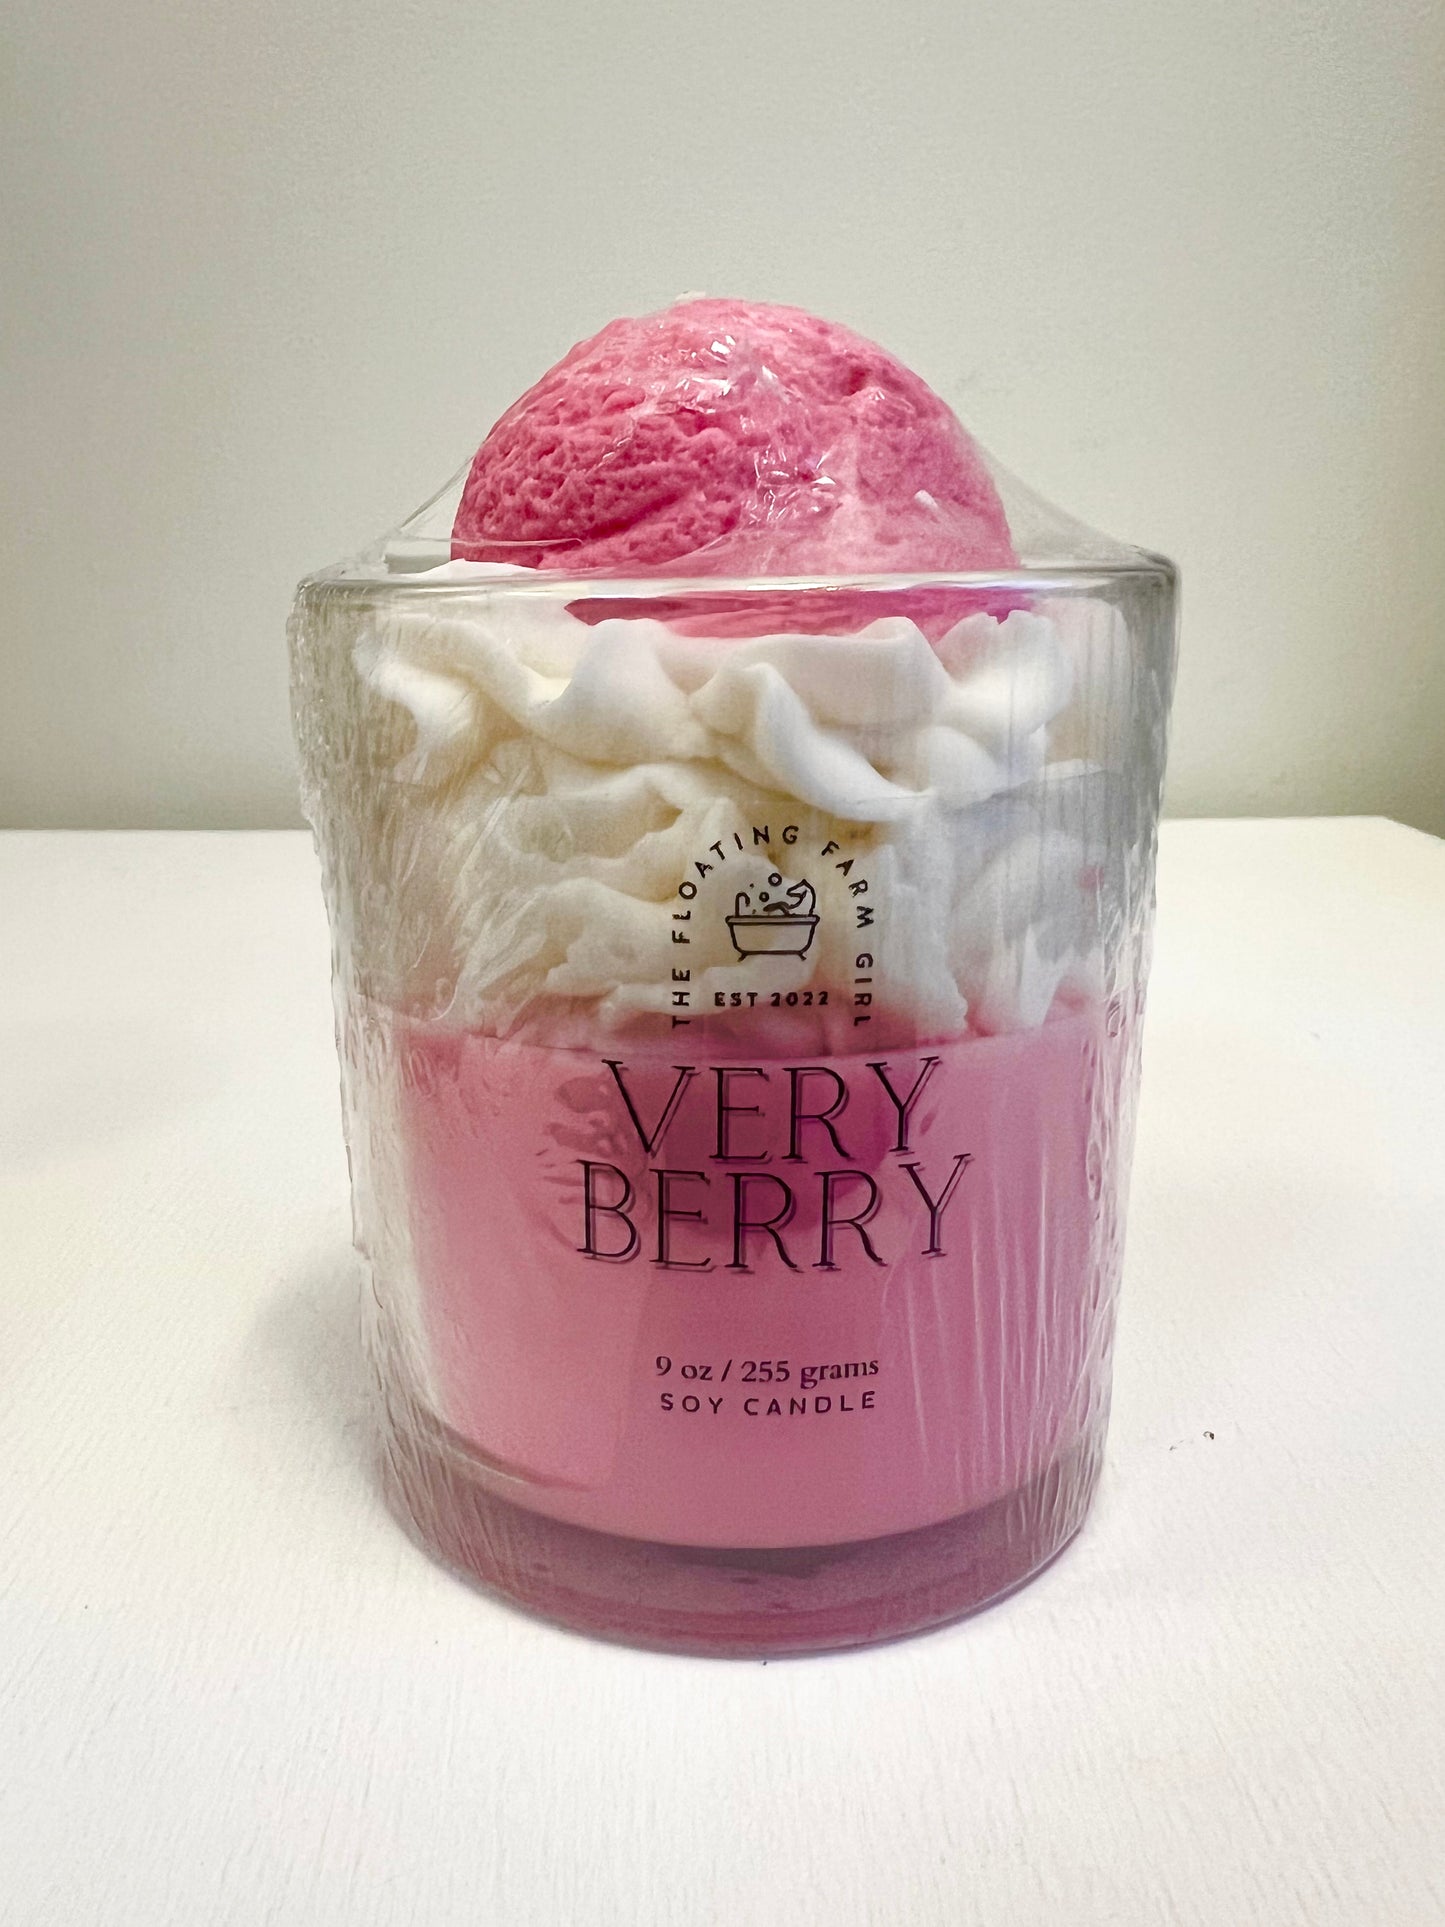 Very Berry Soy Candle